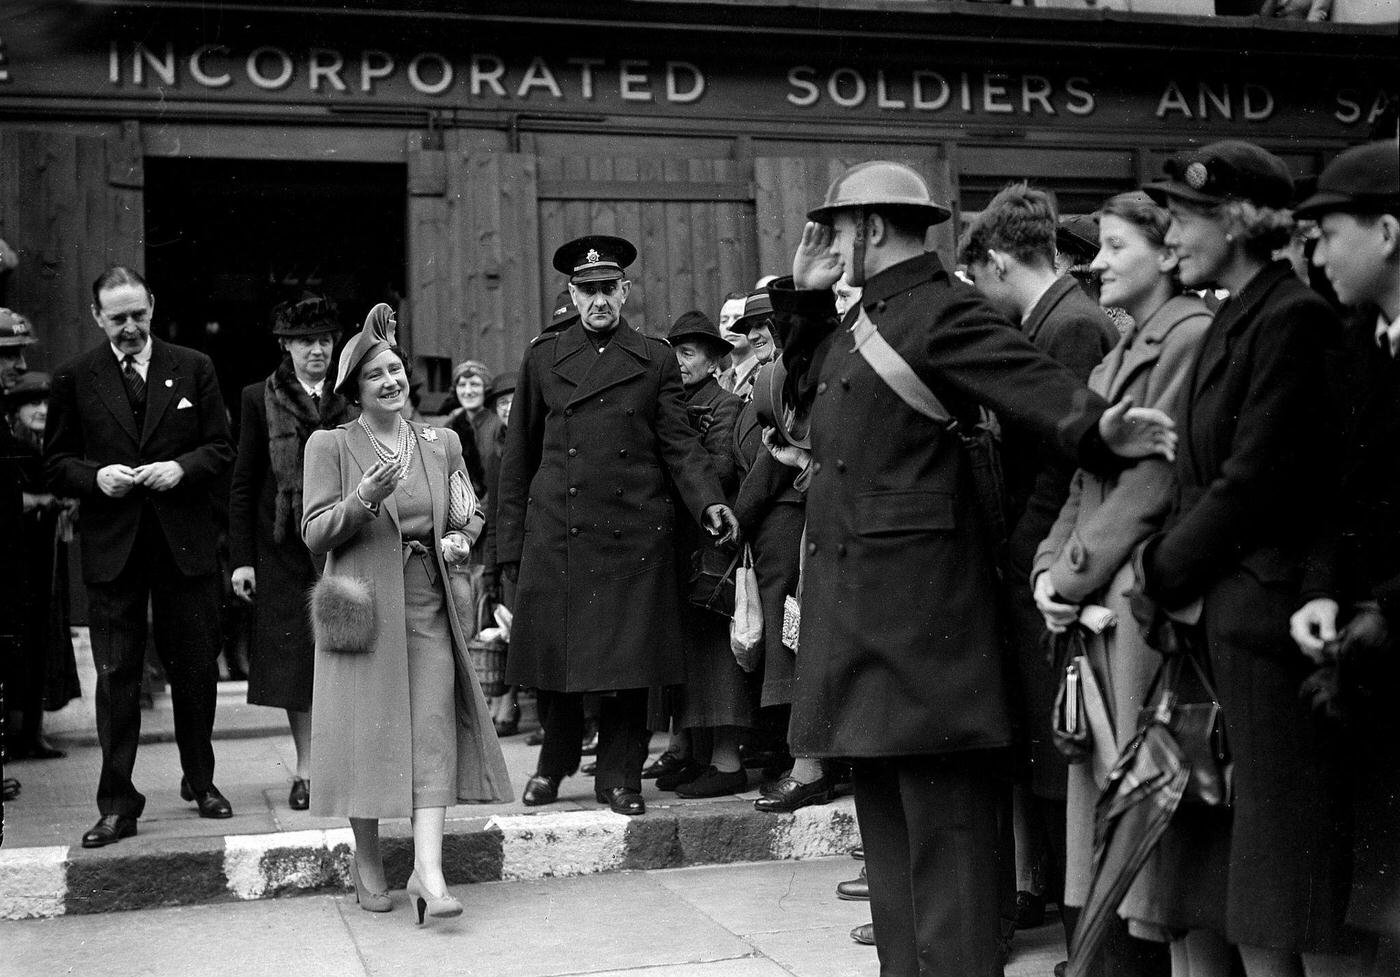 Queen Elizabeth gets a warm welcome while on an official visit during World War II.